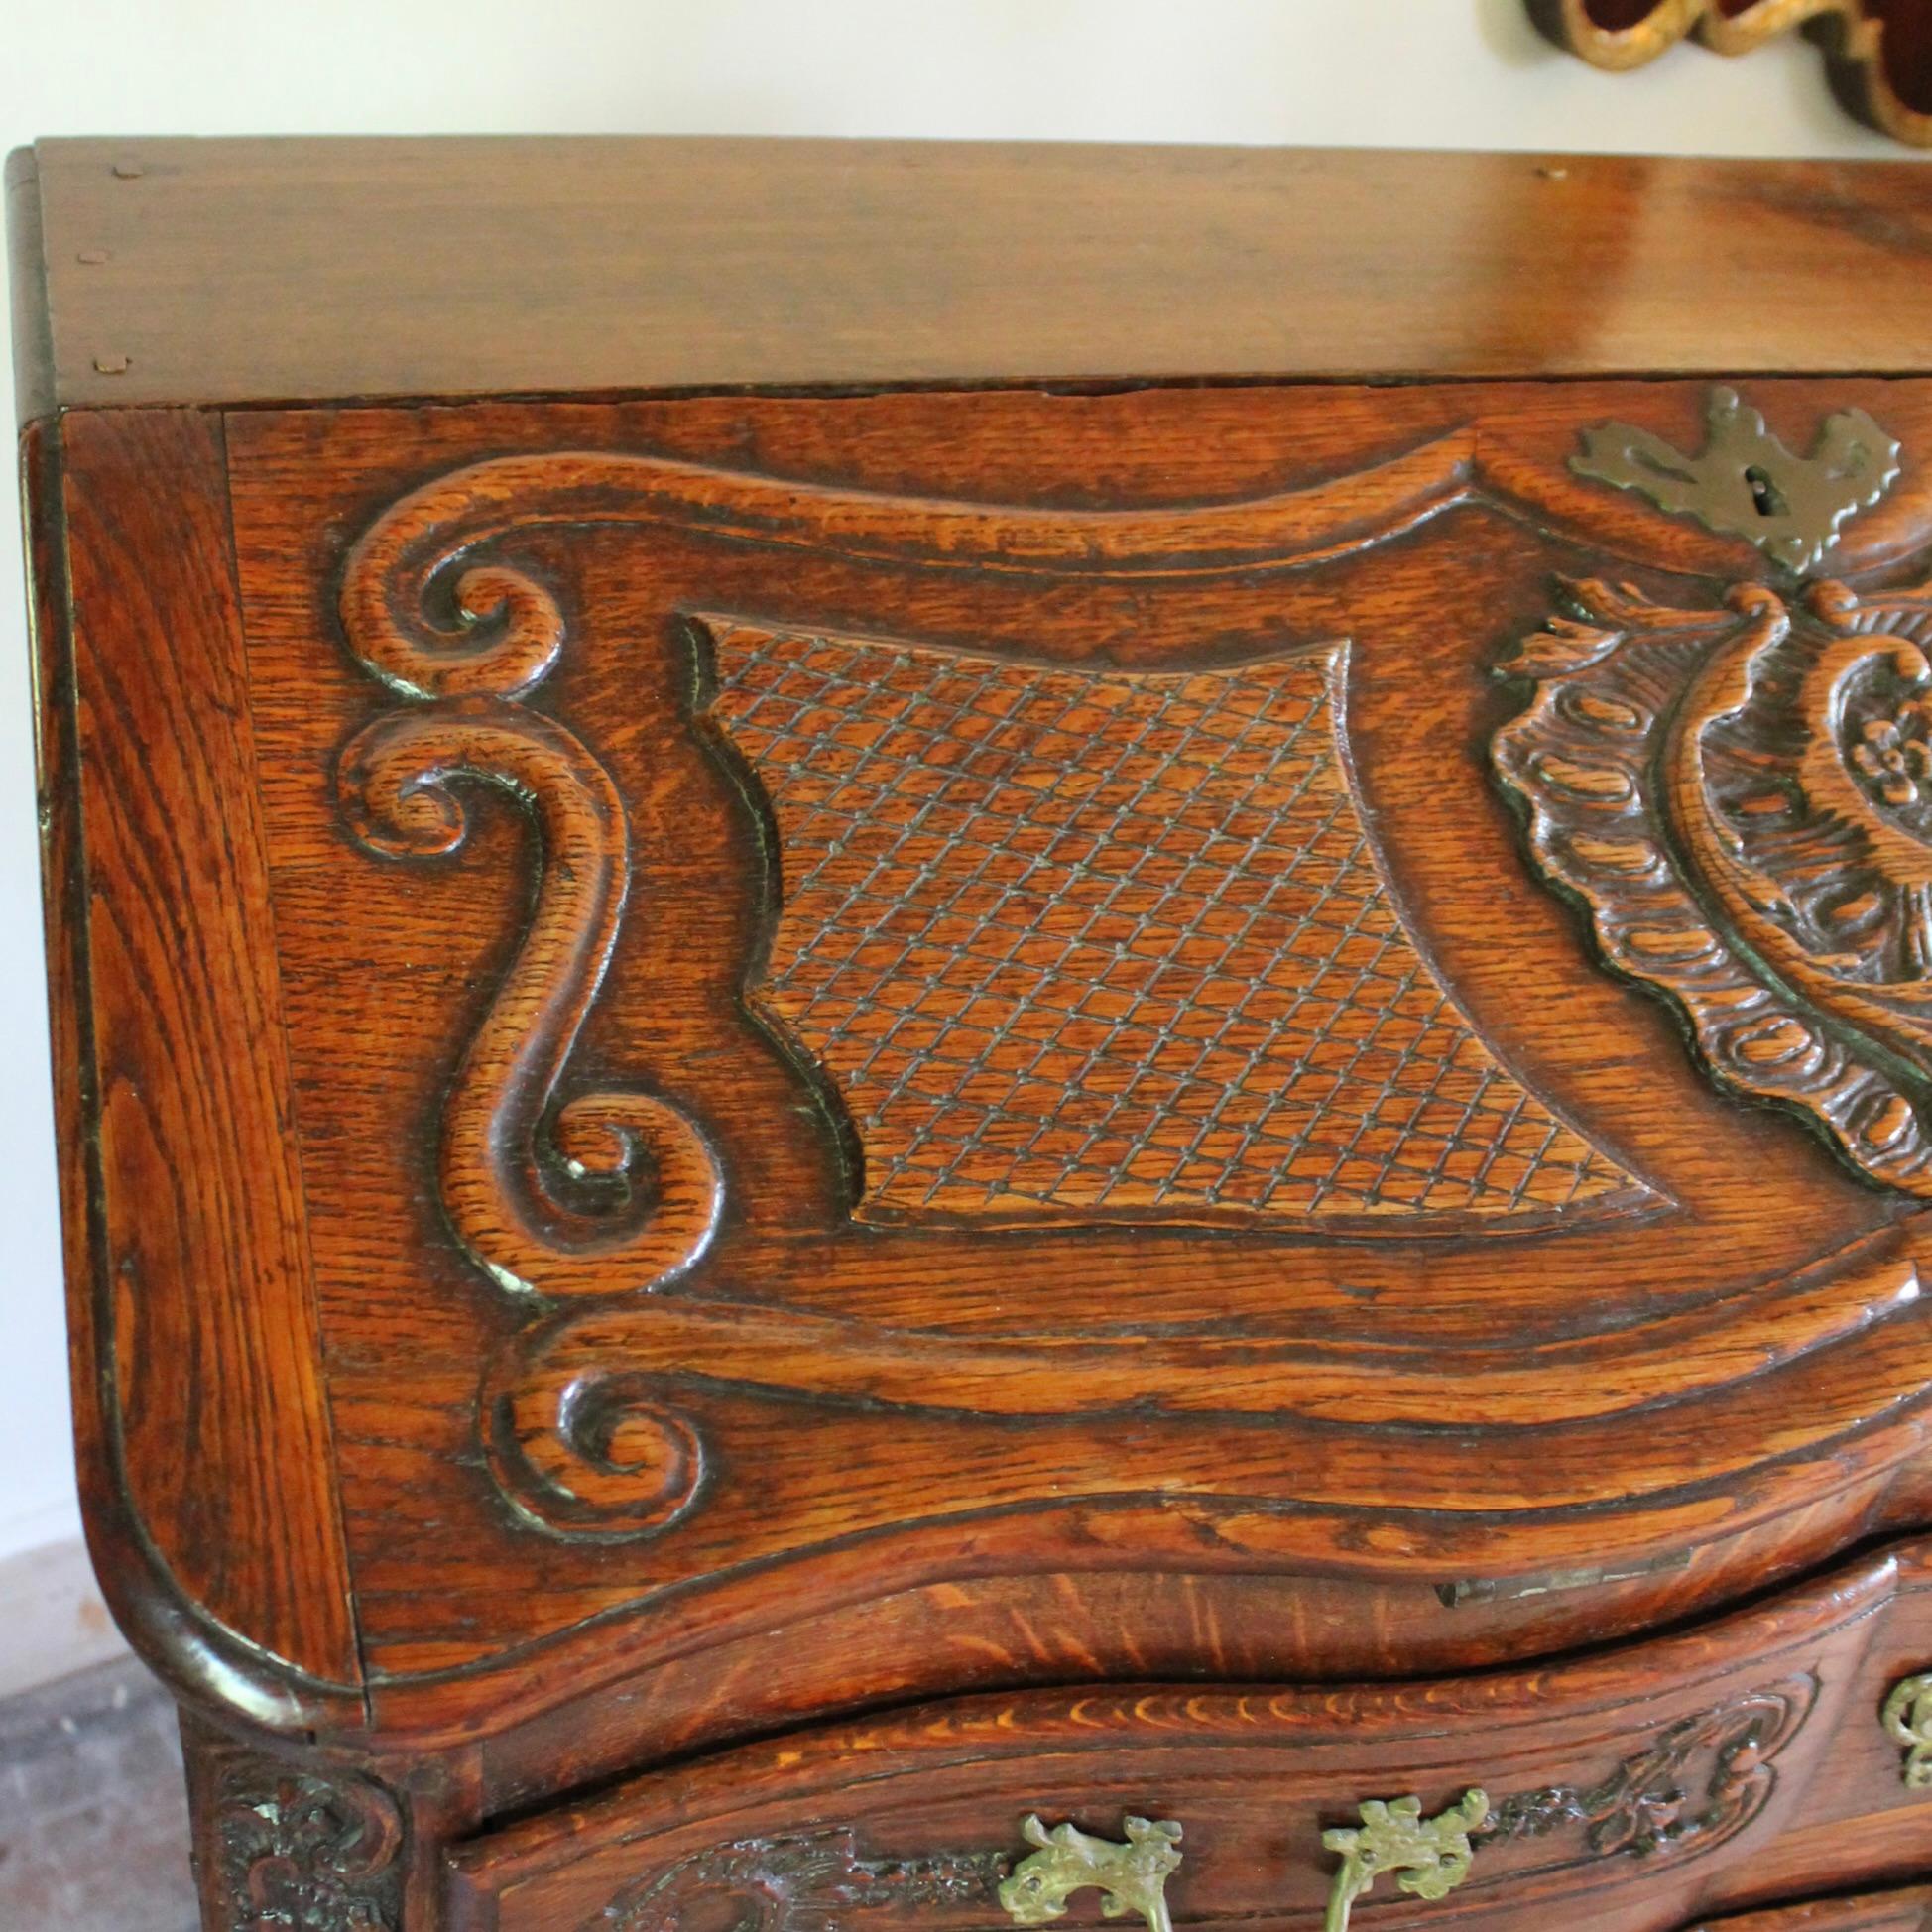 Continental Régence Inspired Commode With Rococo Carved Desk Top In Good Condition For Sale In Free Union, VA